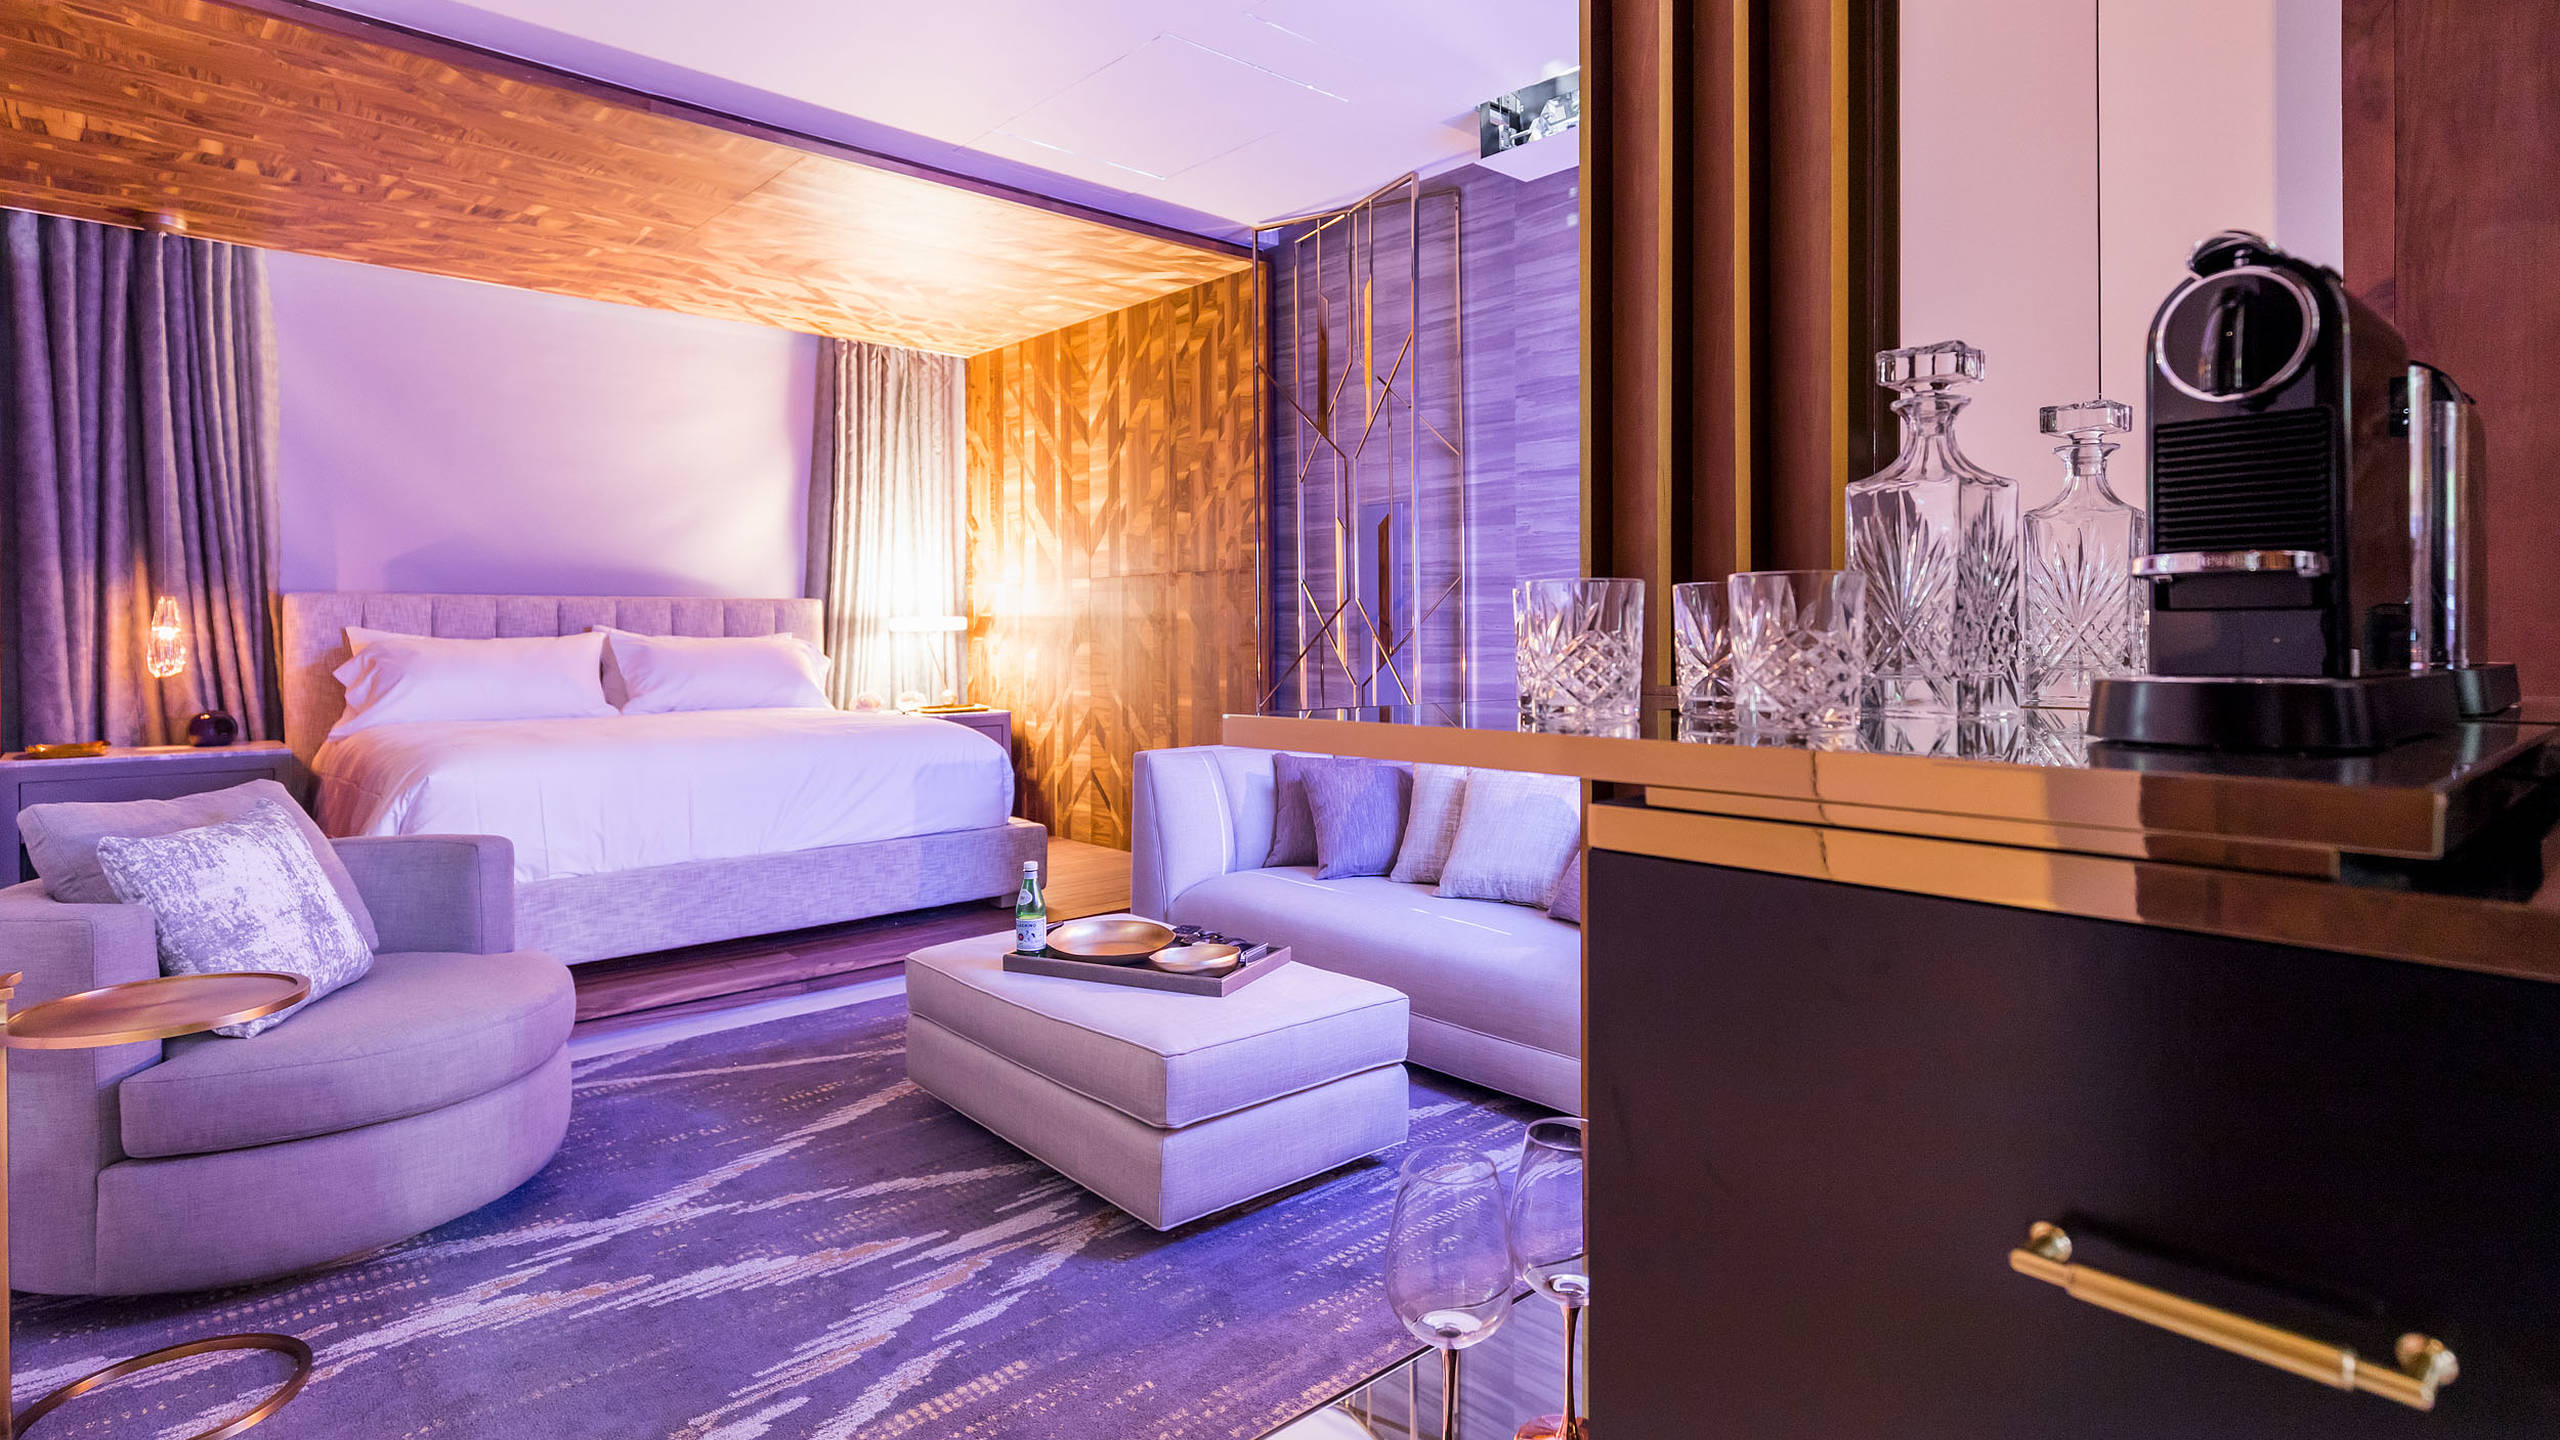 ADMARES built the ultimate luxury guest room for Hilton Hotel